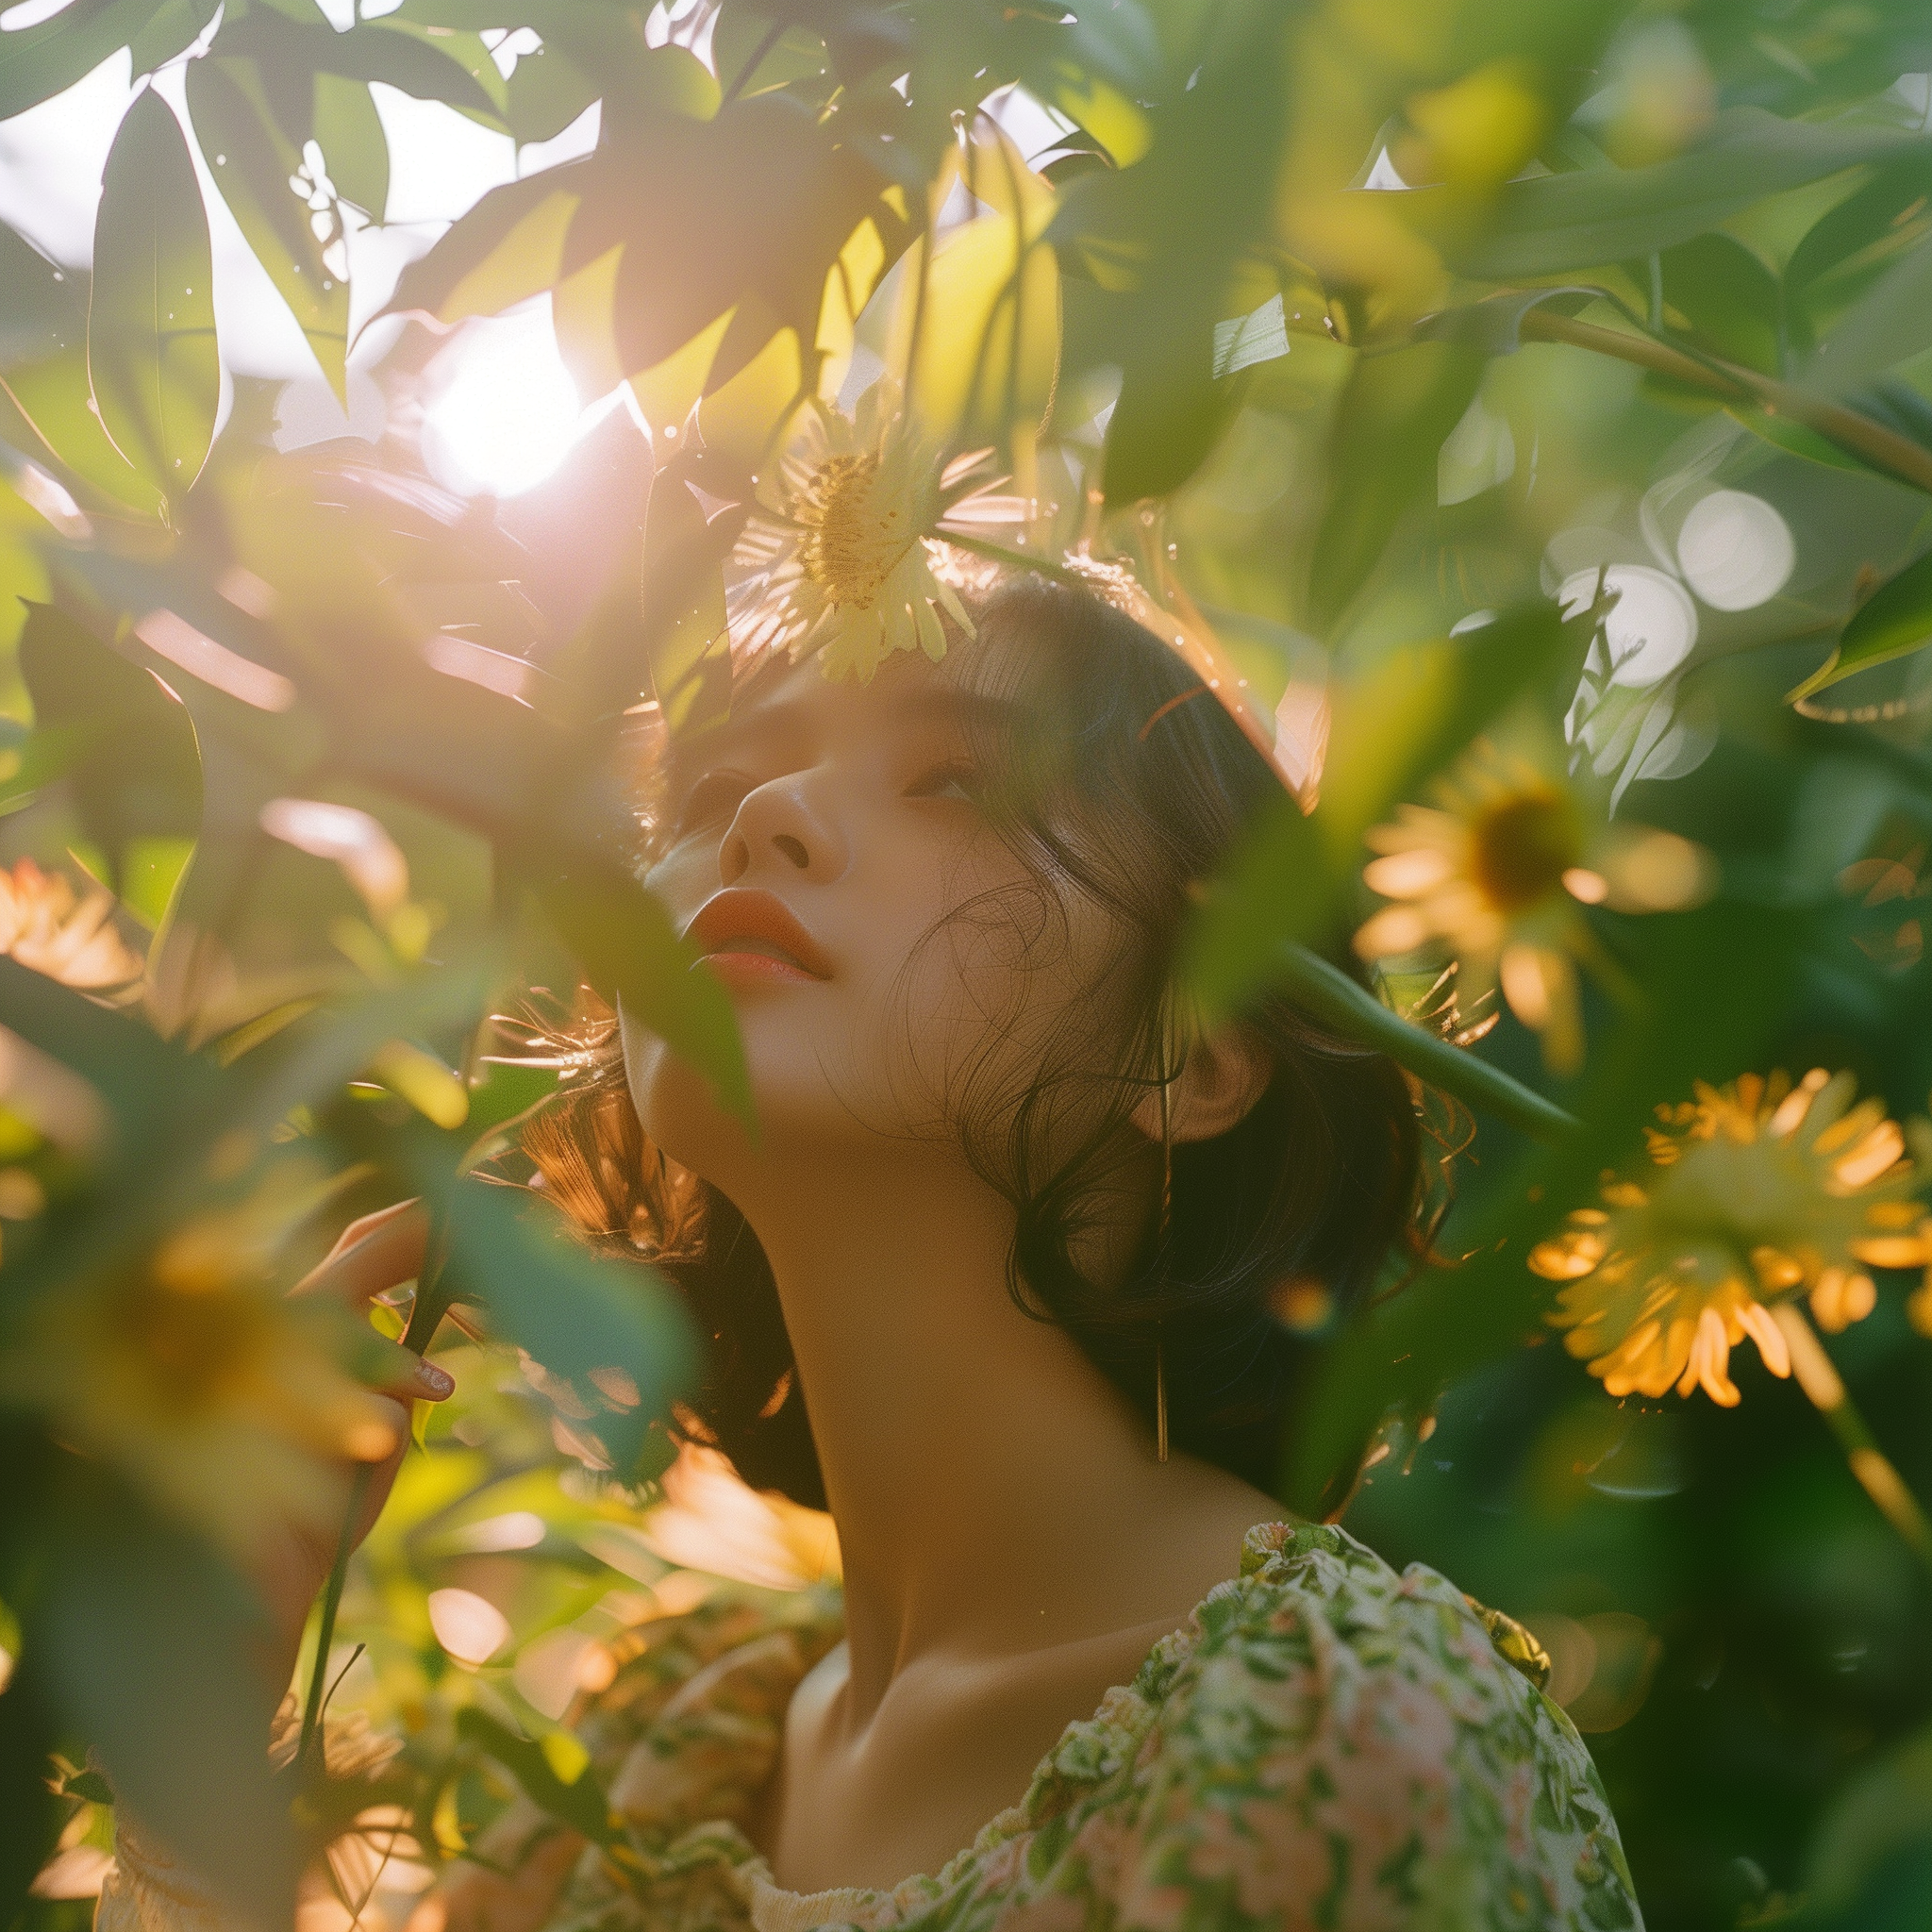 Avatar of a woman bathed in sunlight among flowers, capturing a serene and sunny disposition.